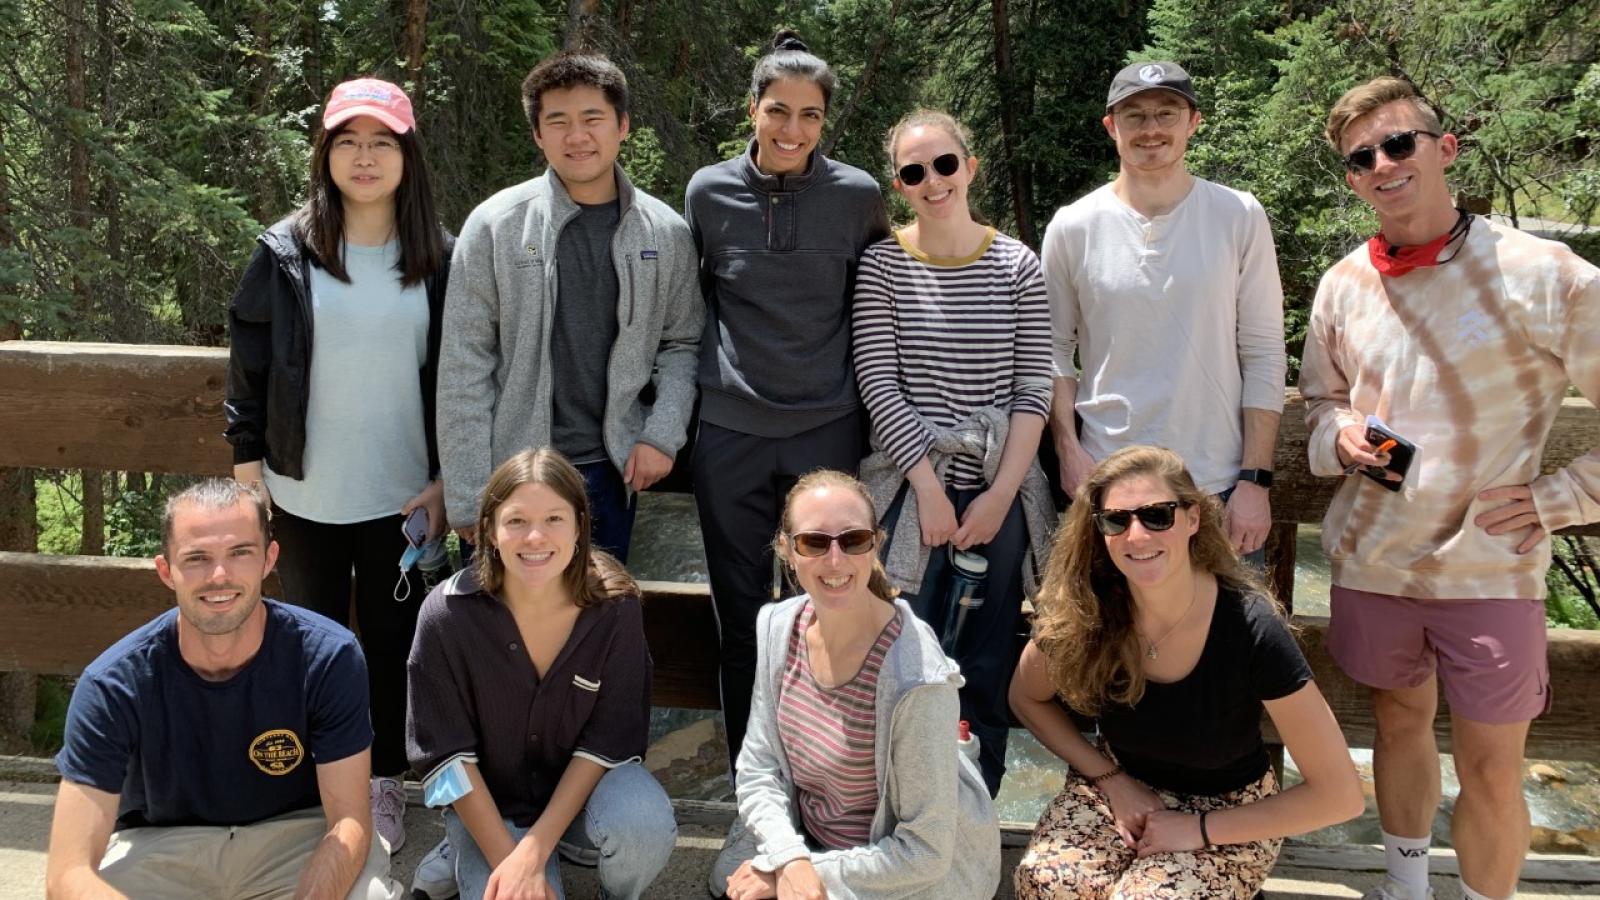 Spencer Lab Retreat August 2022. Left to right: (Top) Yao Rong, Scott Lin, Varuna Nangia, Claire Armstrong, Victor Passanisi, Tim Hoffman; (Bottom) Riley Ill, Bri Fernandez, Sabrina Spencer, Lotte Watts